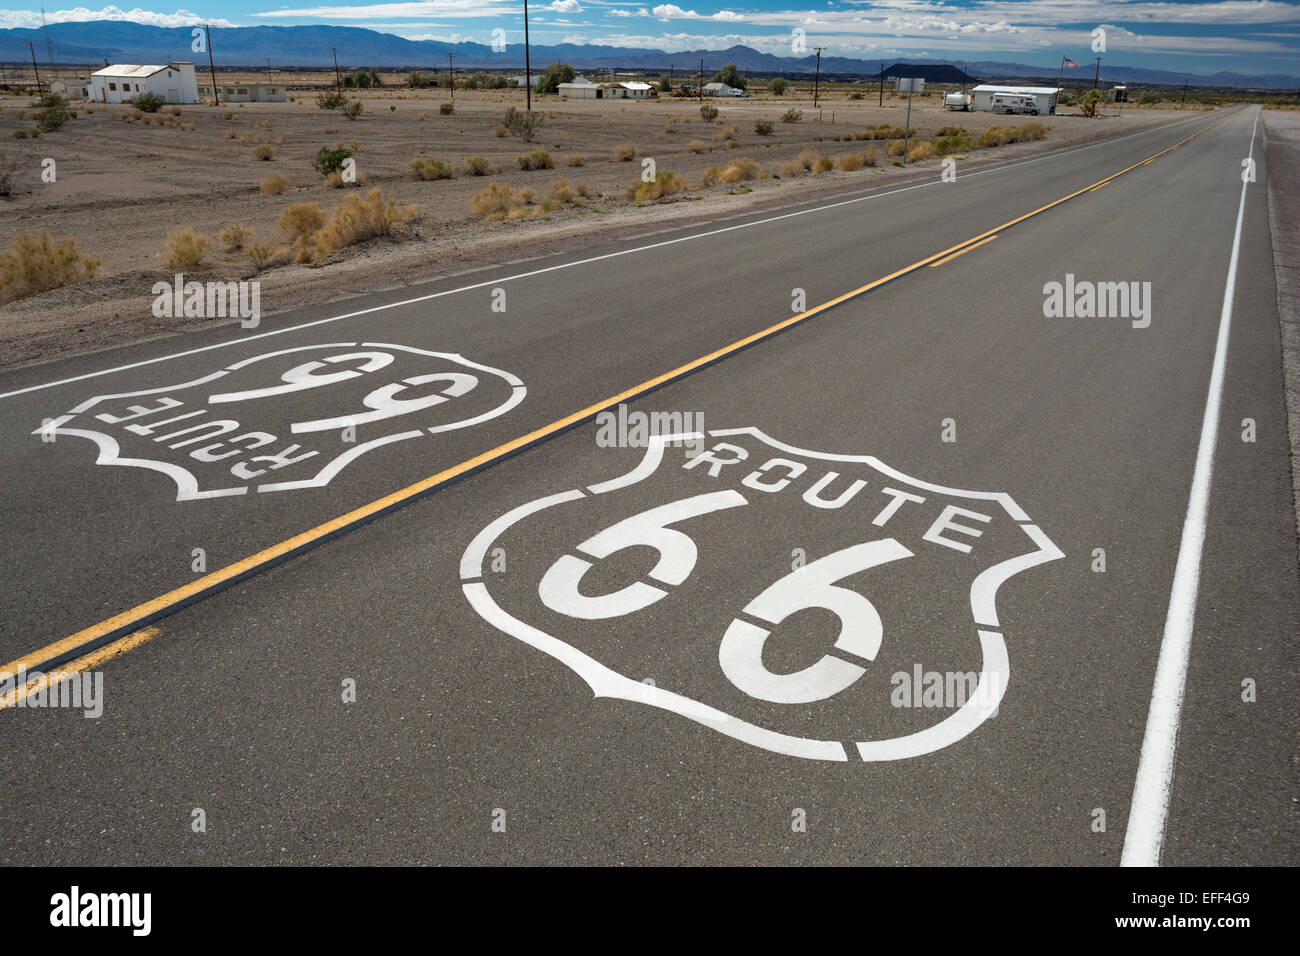 ROUTE 66 SHIELDS NATIONAL TRAILS HIGHWAY AMBOY CALIFORNIA USA Stock Photo